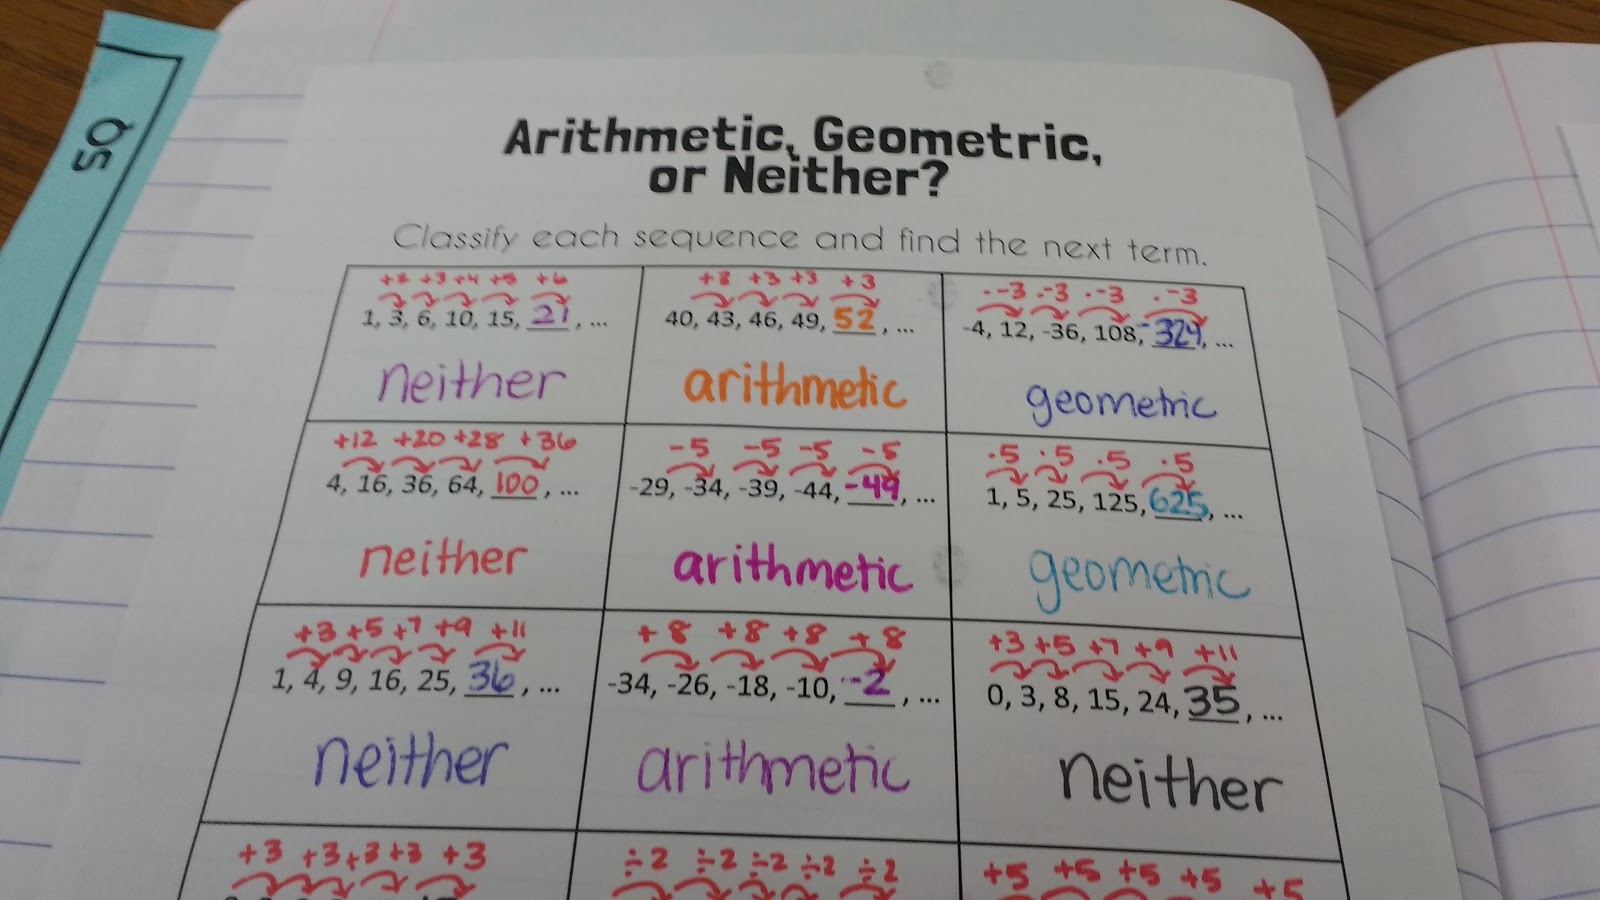 Classifying Sequences Activity - Arithmetic, Geometric, or Neither?